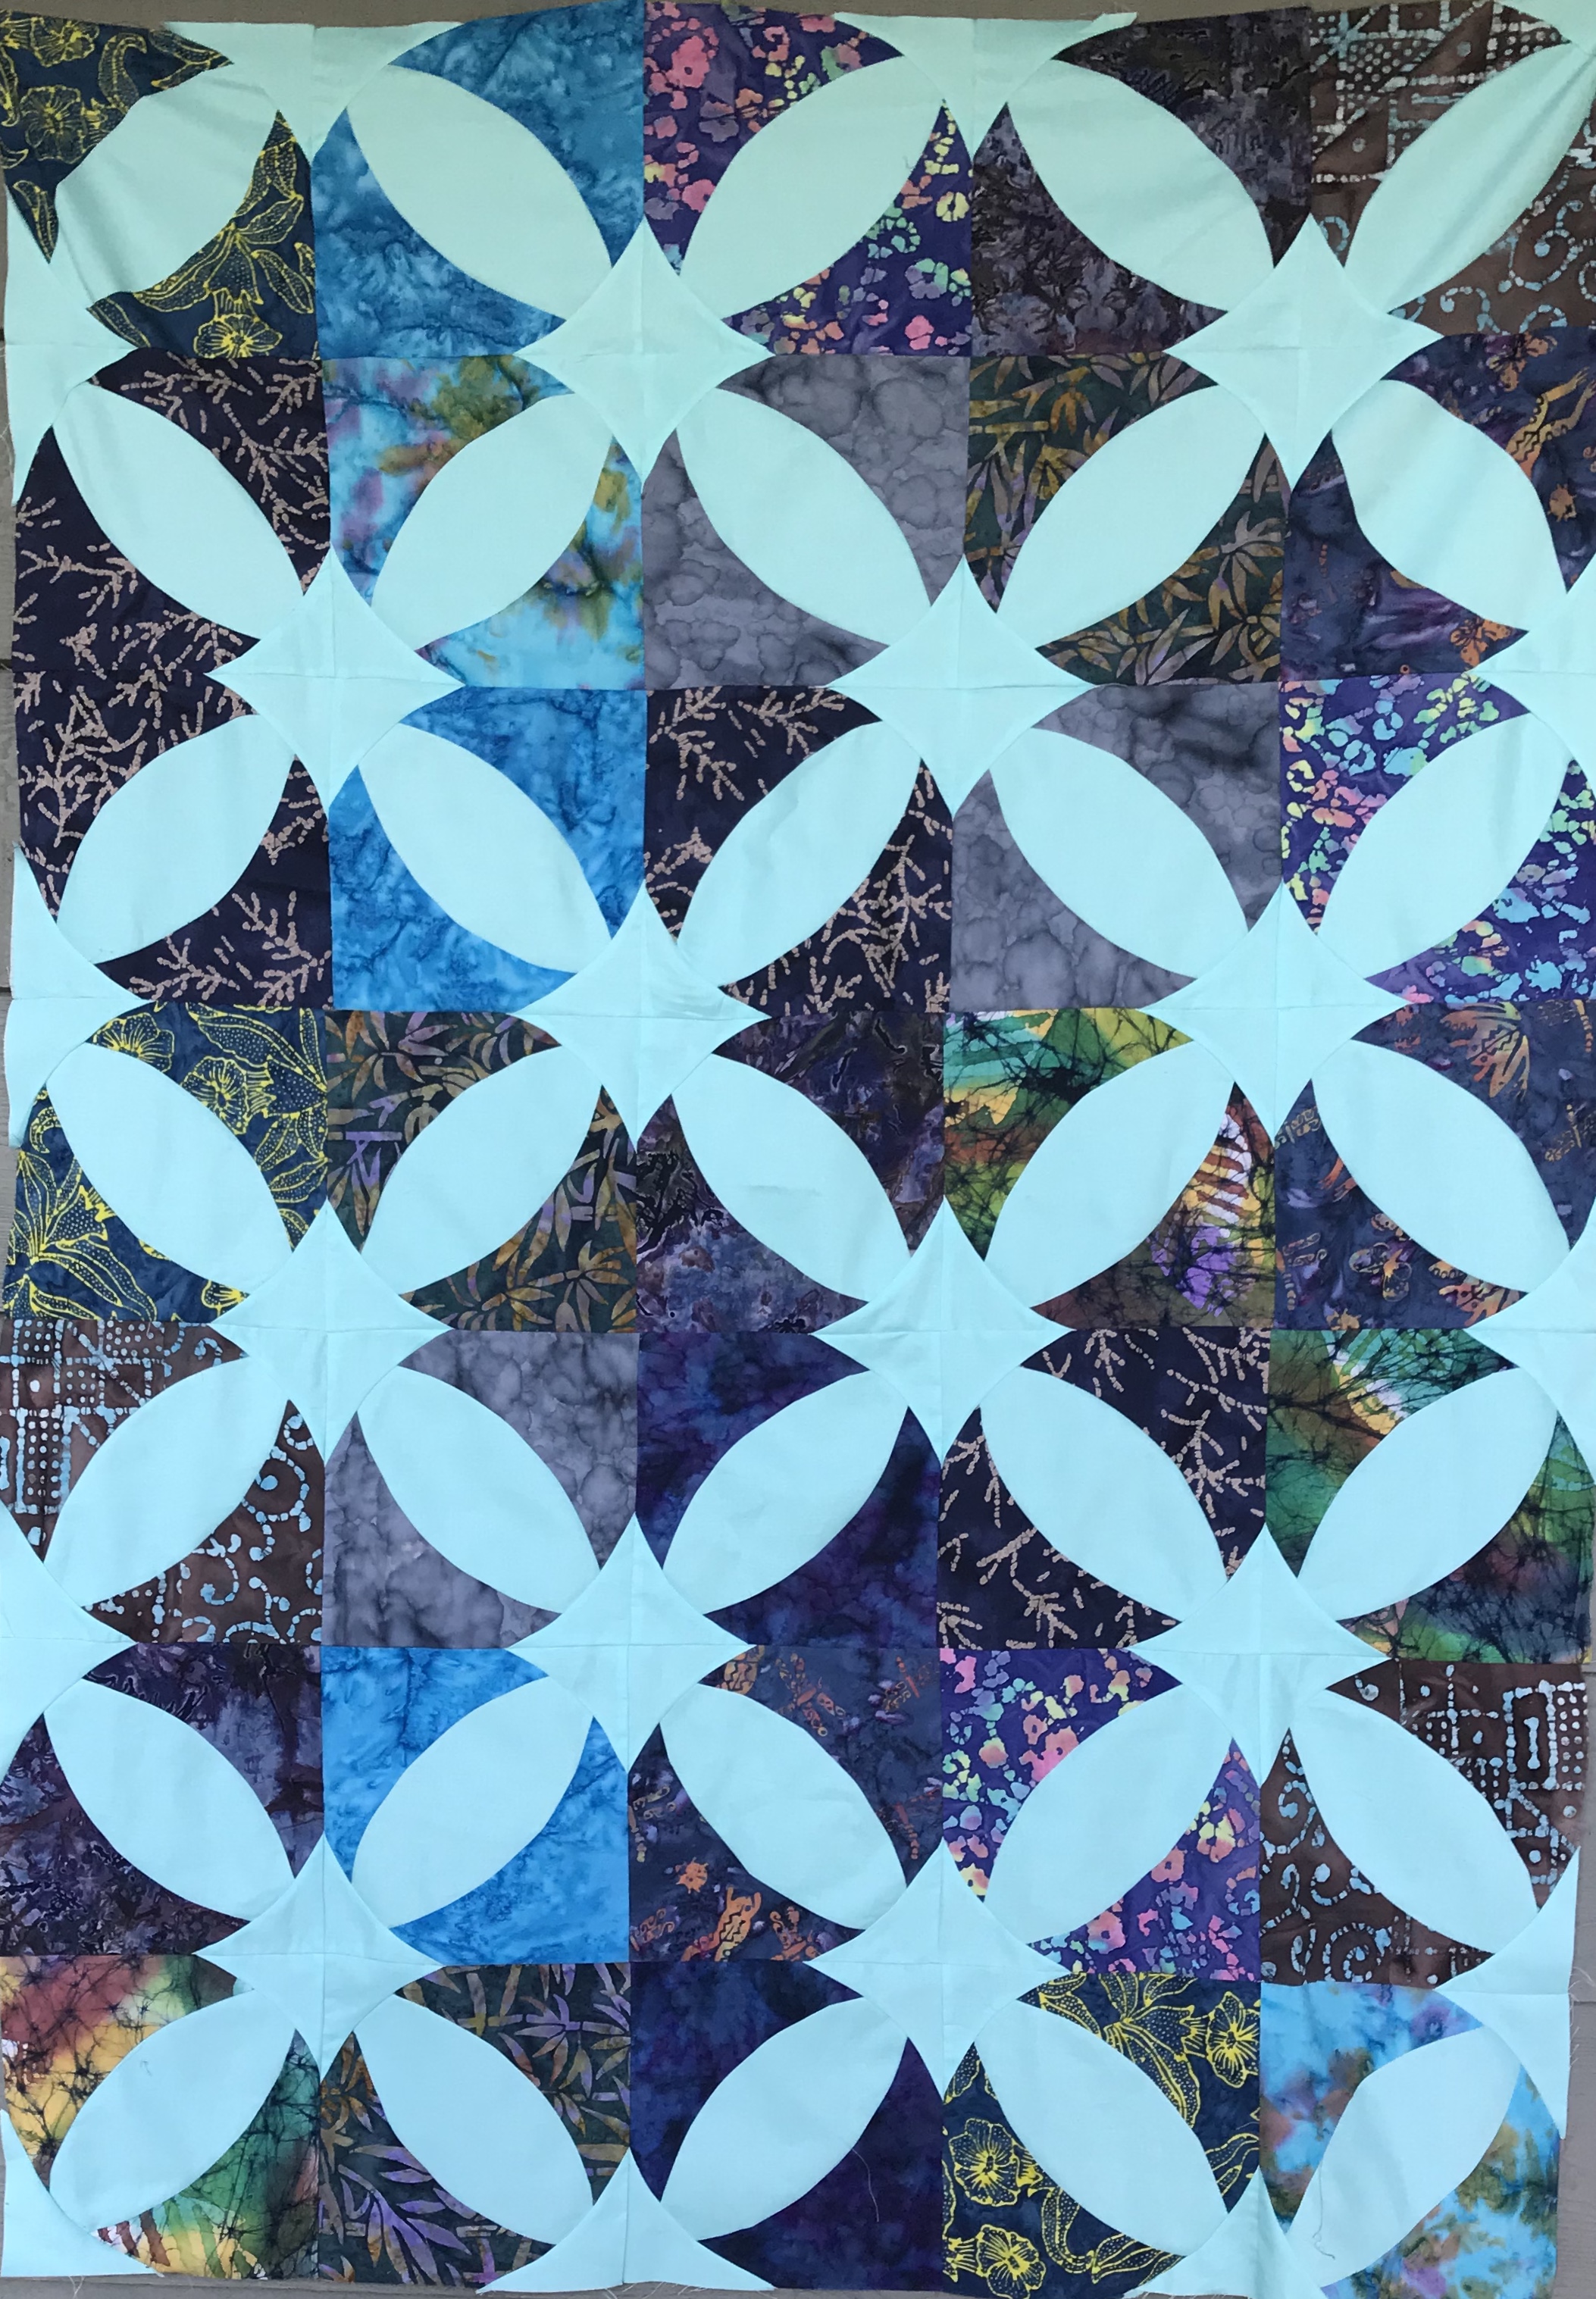 A patterned blue and dark blue quilt